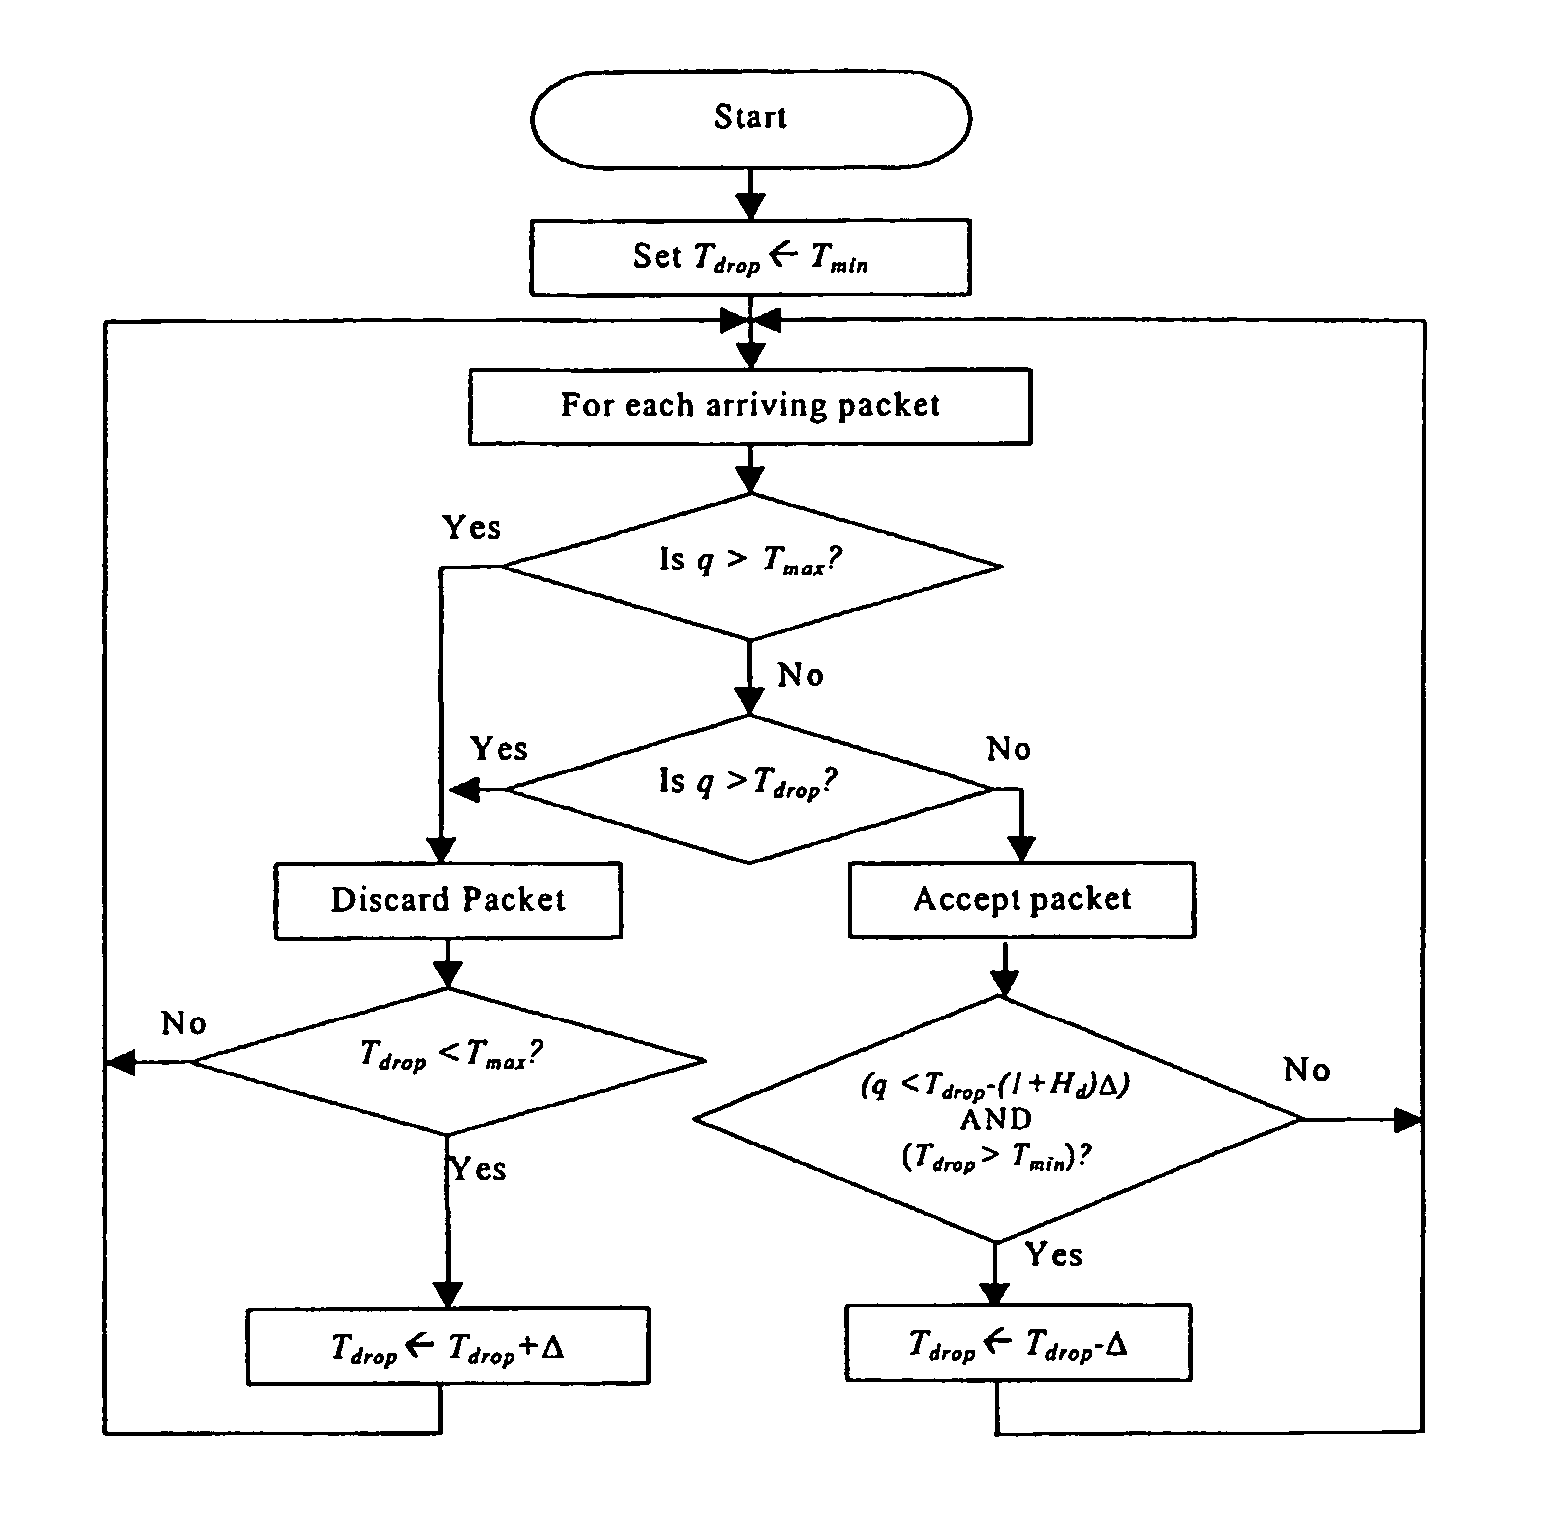 Congestion and delay handling in a packet data network